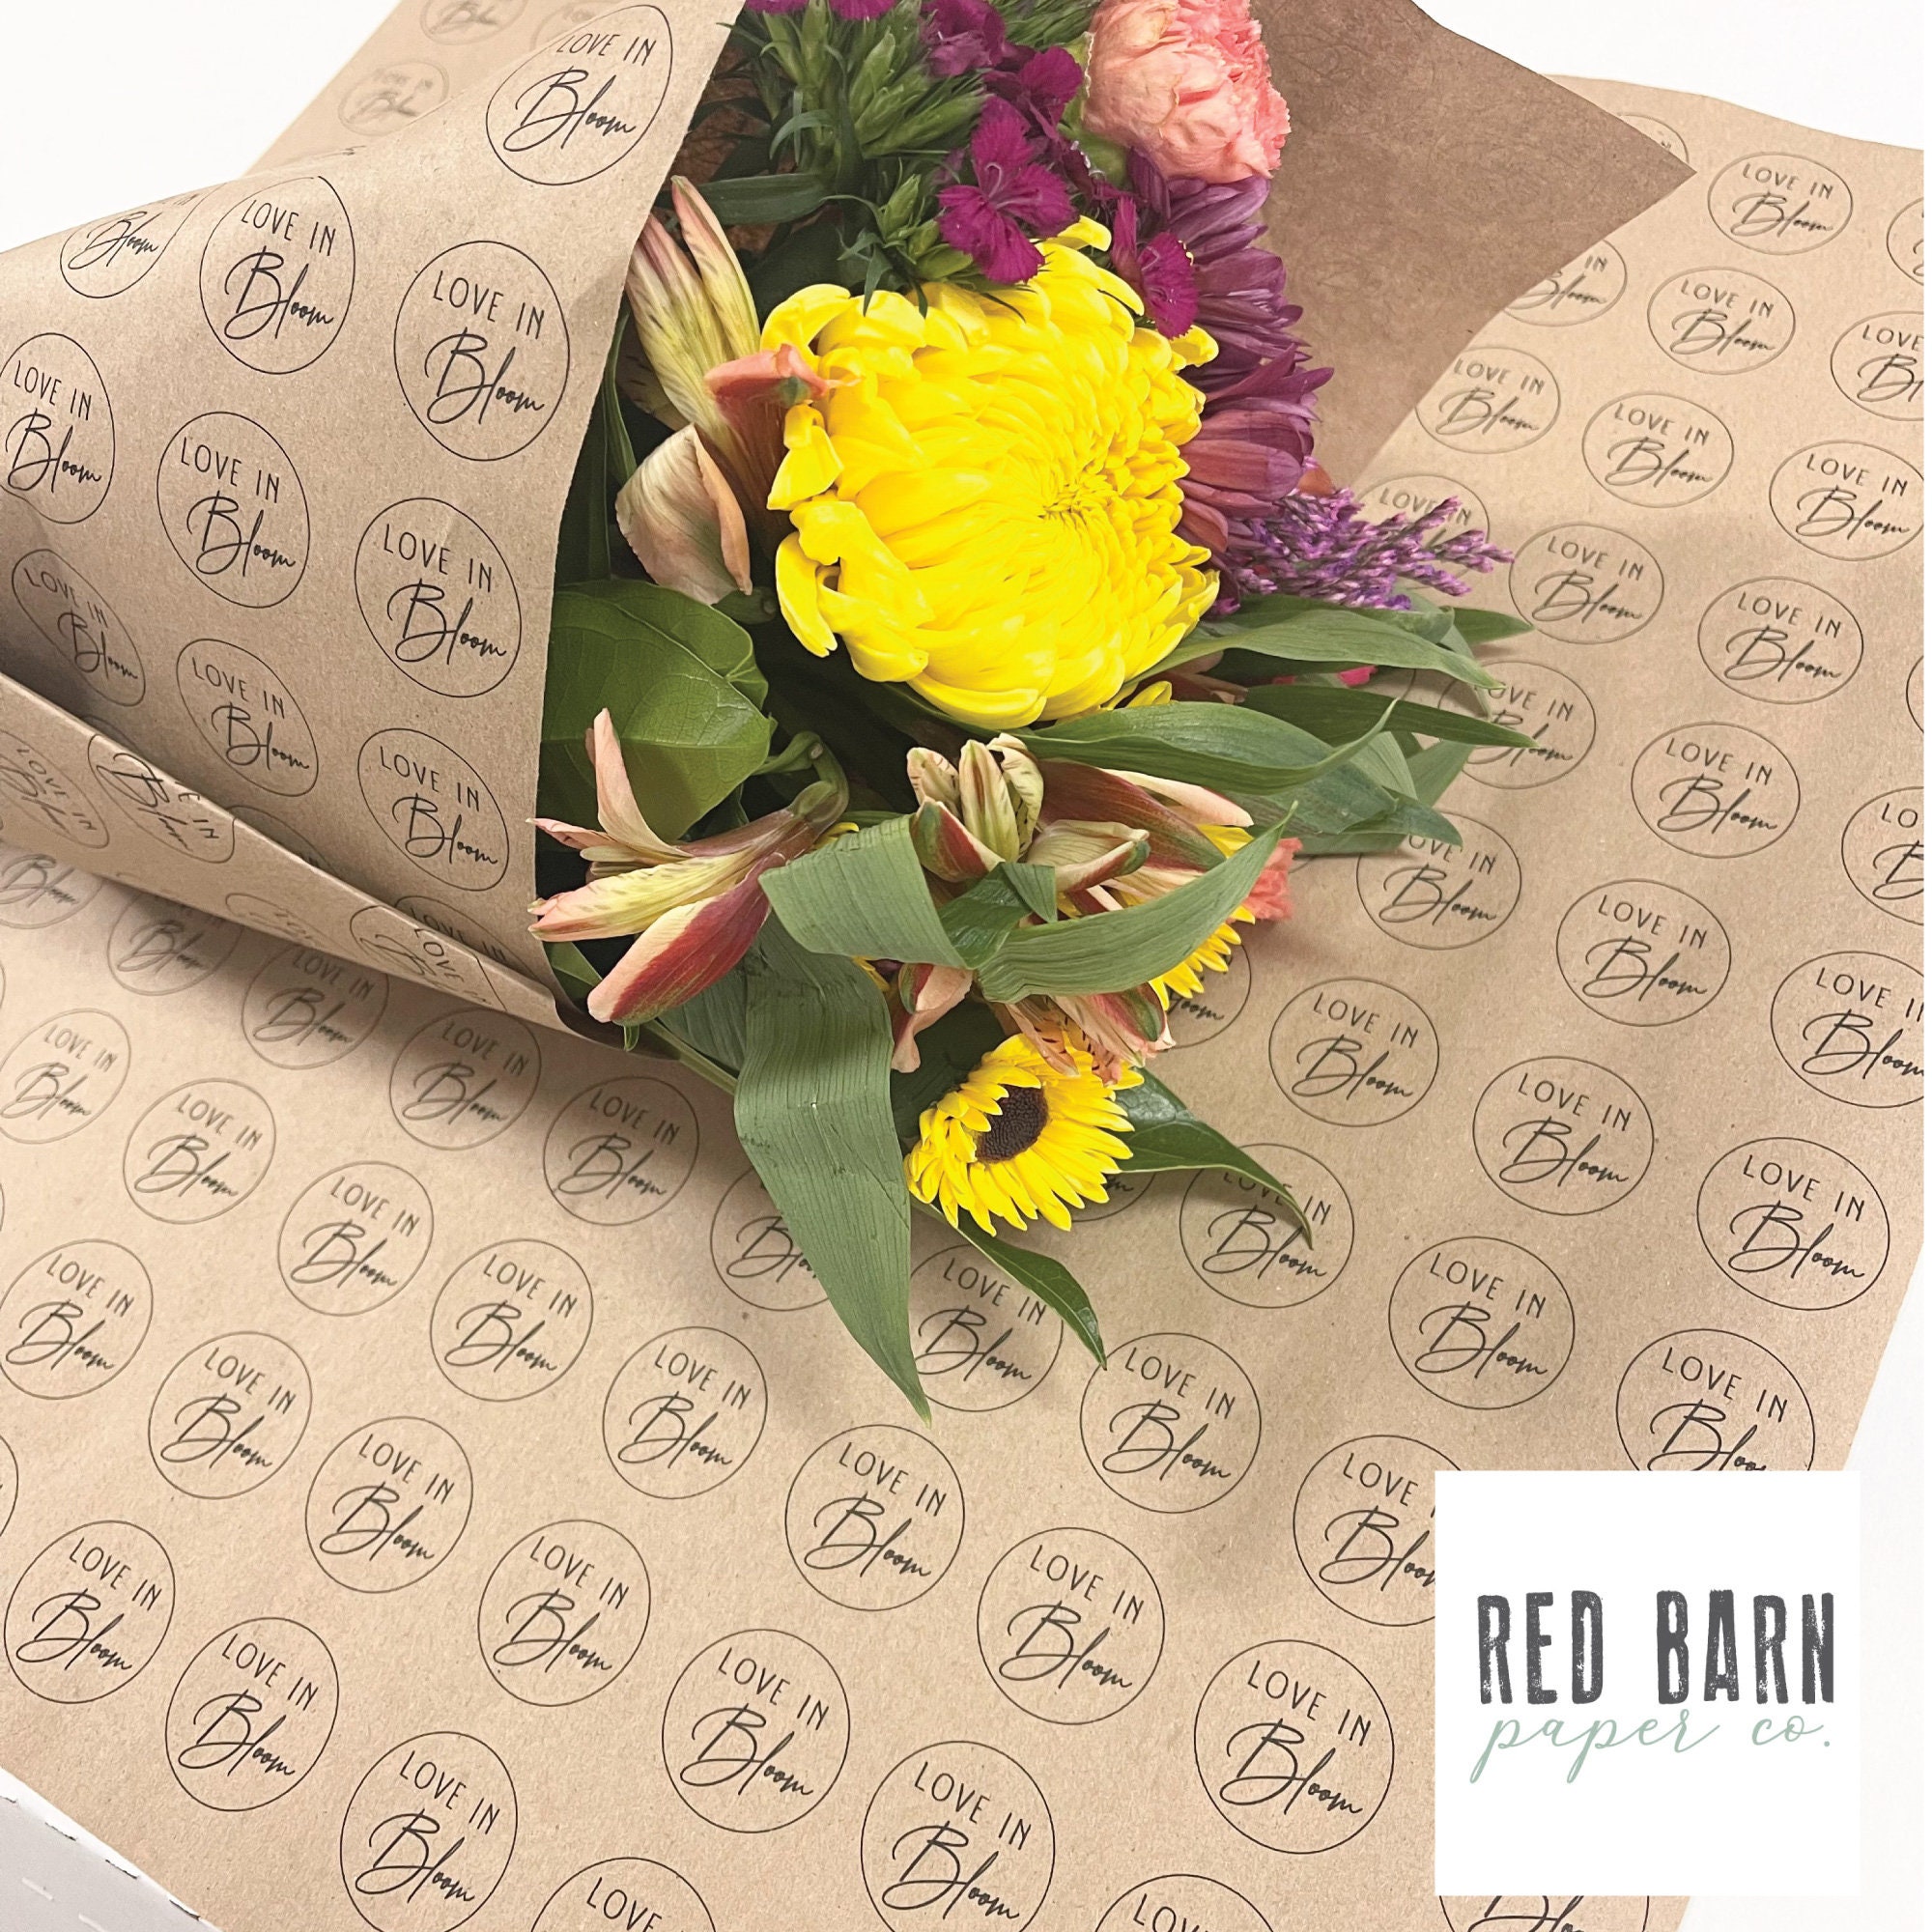 Paper Bouquet Wrap for Flowers Brown Paper Sleeve for Bouquet Custom Floral  Sleeve Bouquet Bar Wrap Natural Paper Flower Sleeve Wrapping 